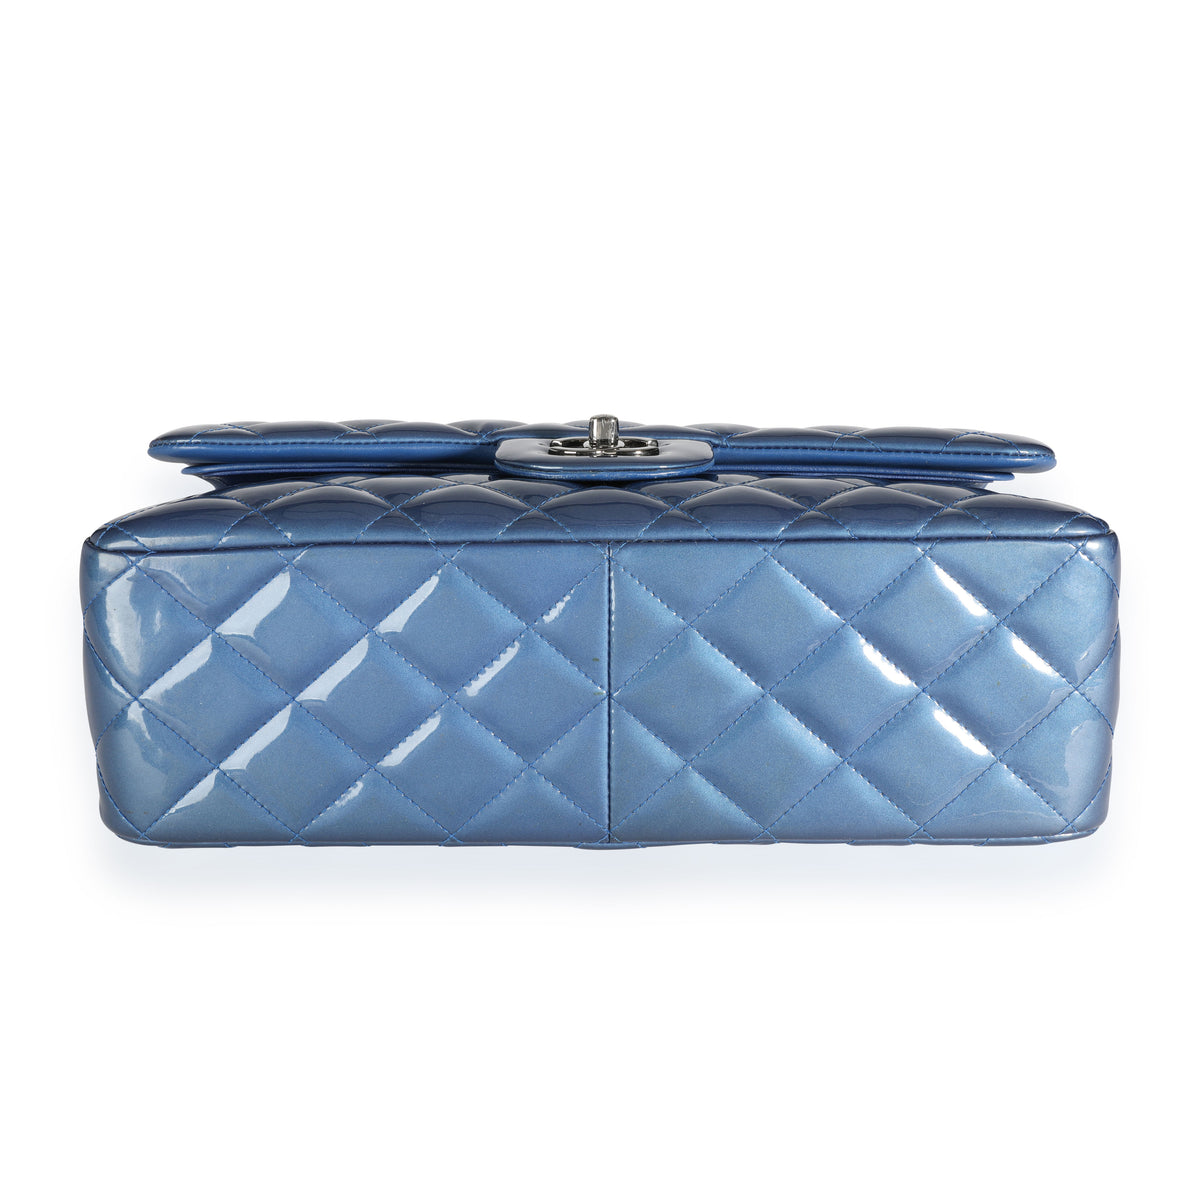 Chanel Blue Patent Leather Quilted Jumbo Classic Double Flap Bag, myGemma